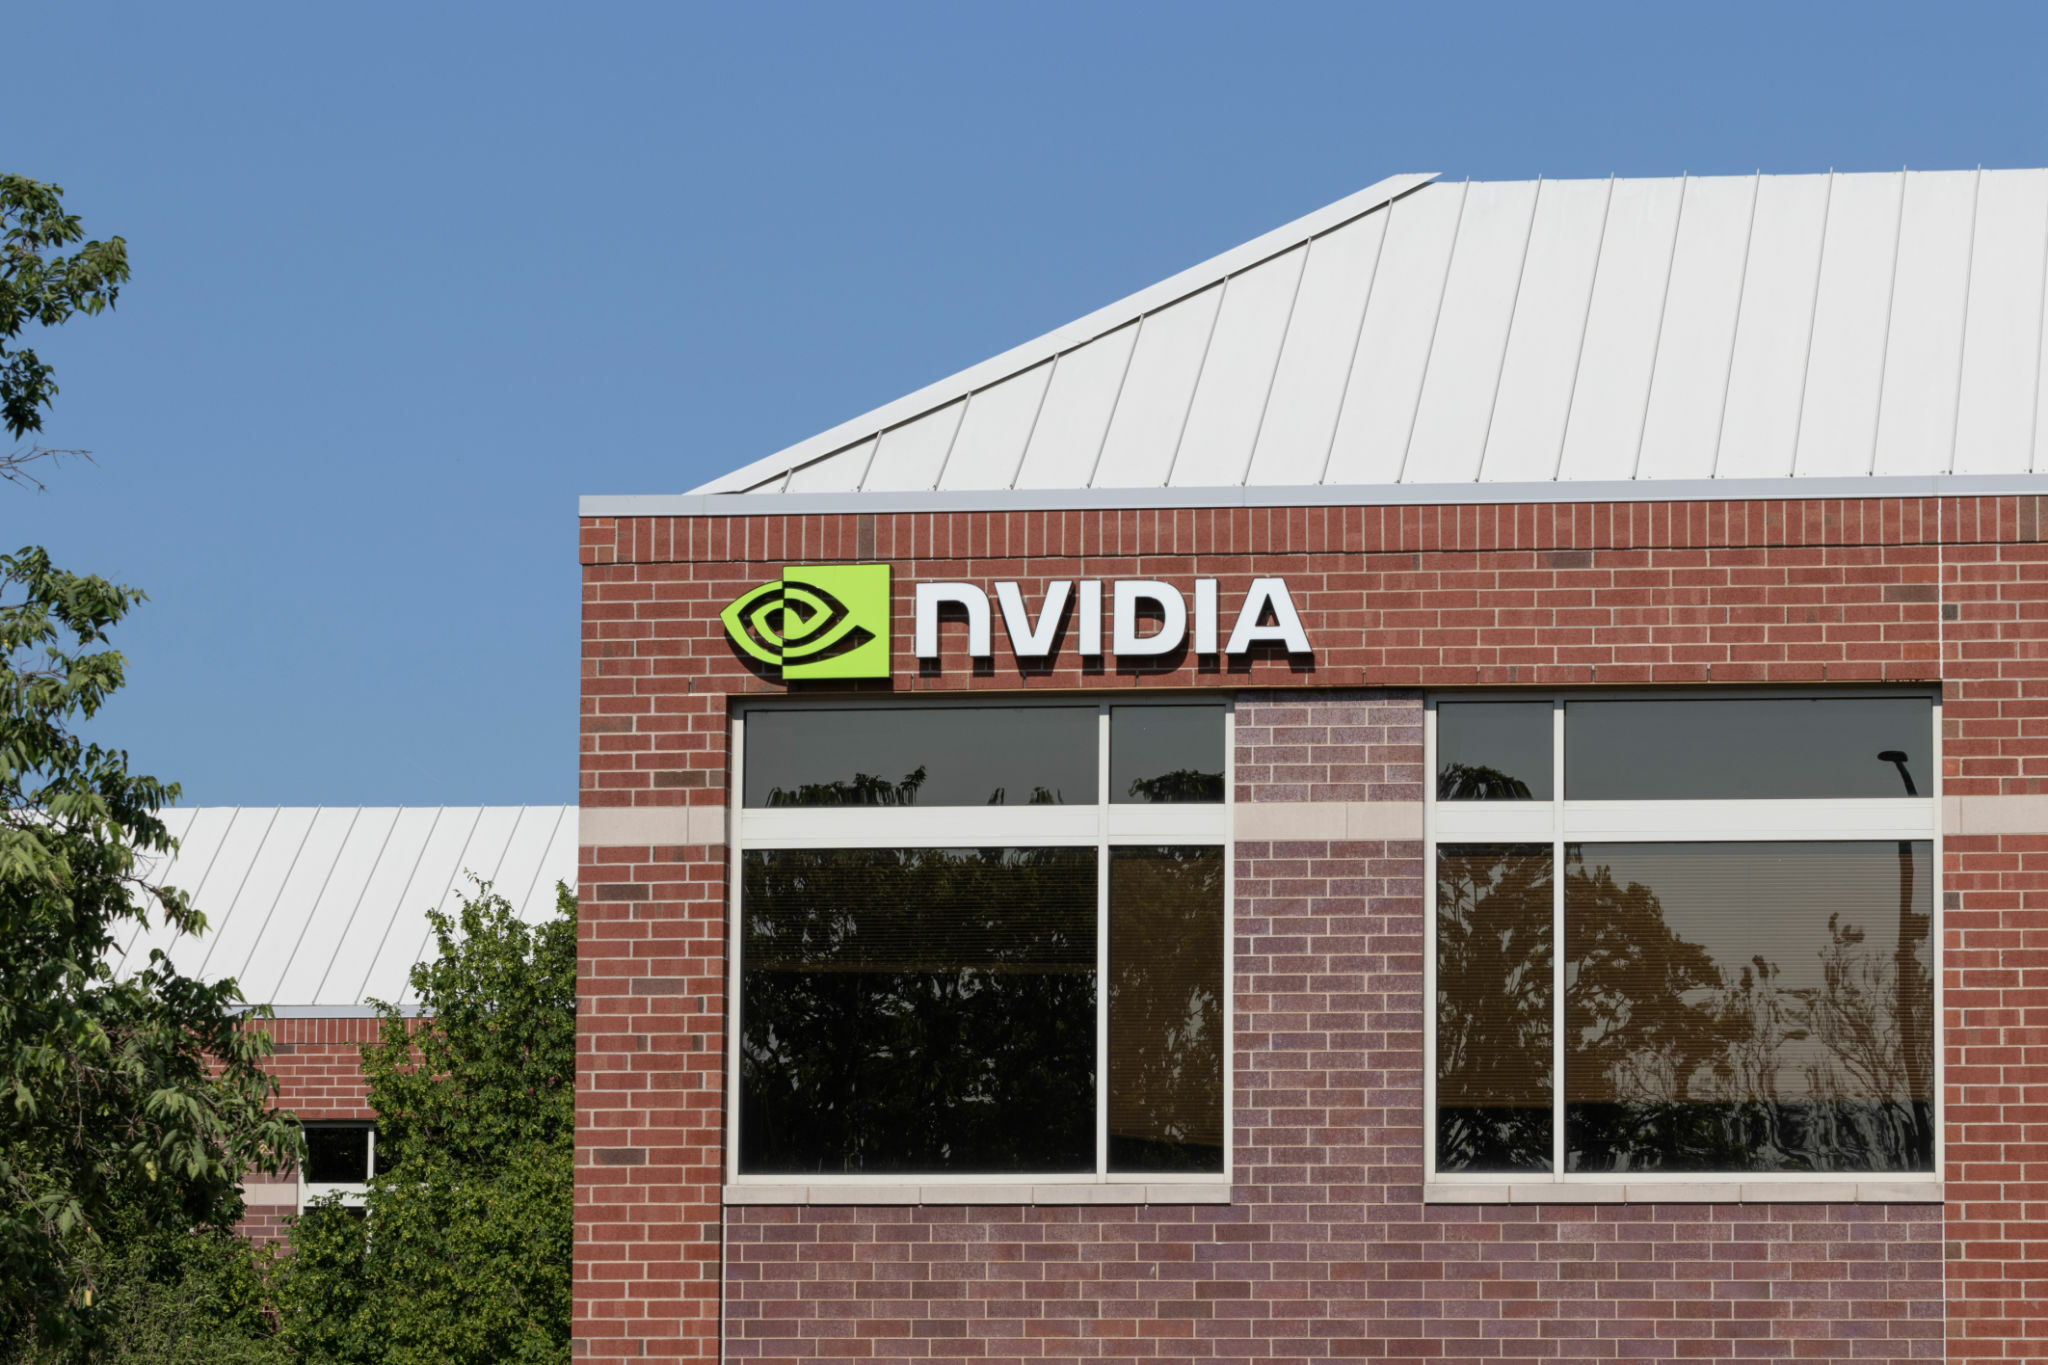 Authors Sue Nvidia for Using Copyrighted Books to Train AI Without Permission